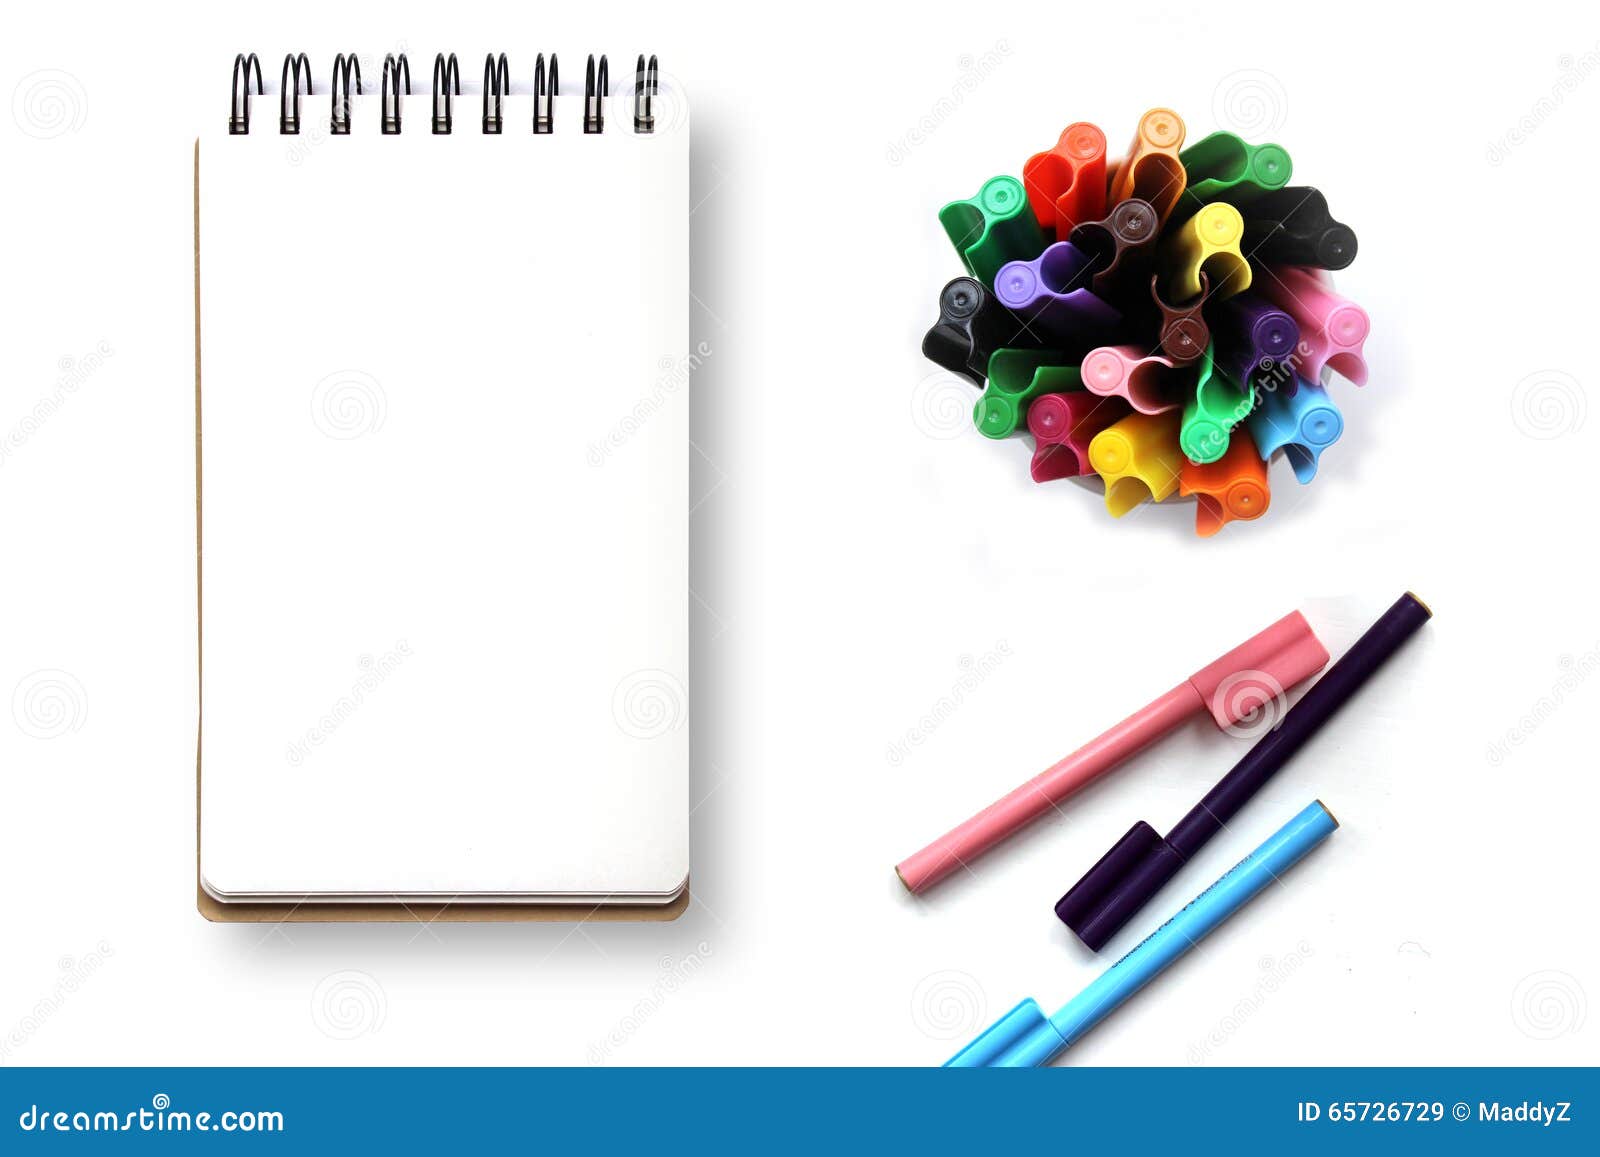 Download 597 Mockup Paper Markers Photos Free Royalty Free Stock Photos From Dreamstime